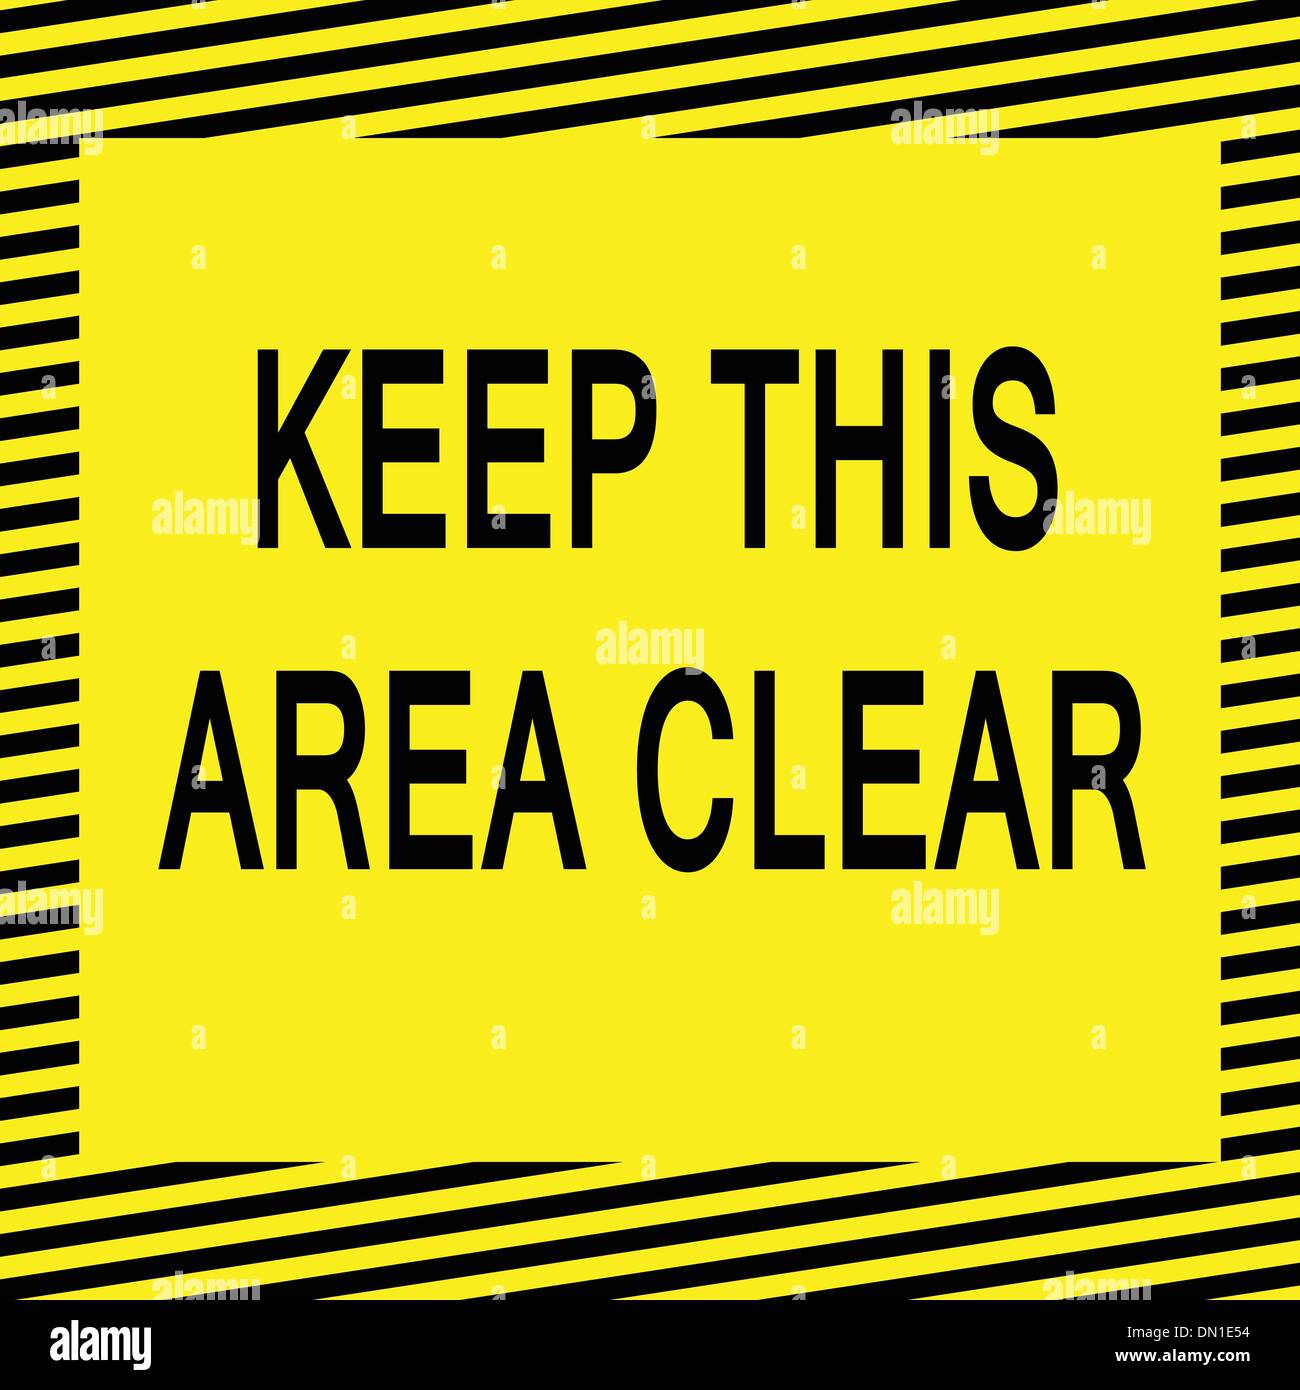 Keep this area clear Stock Vector